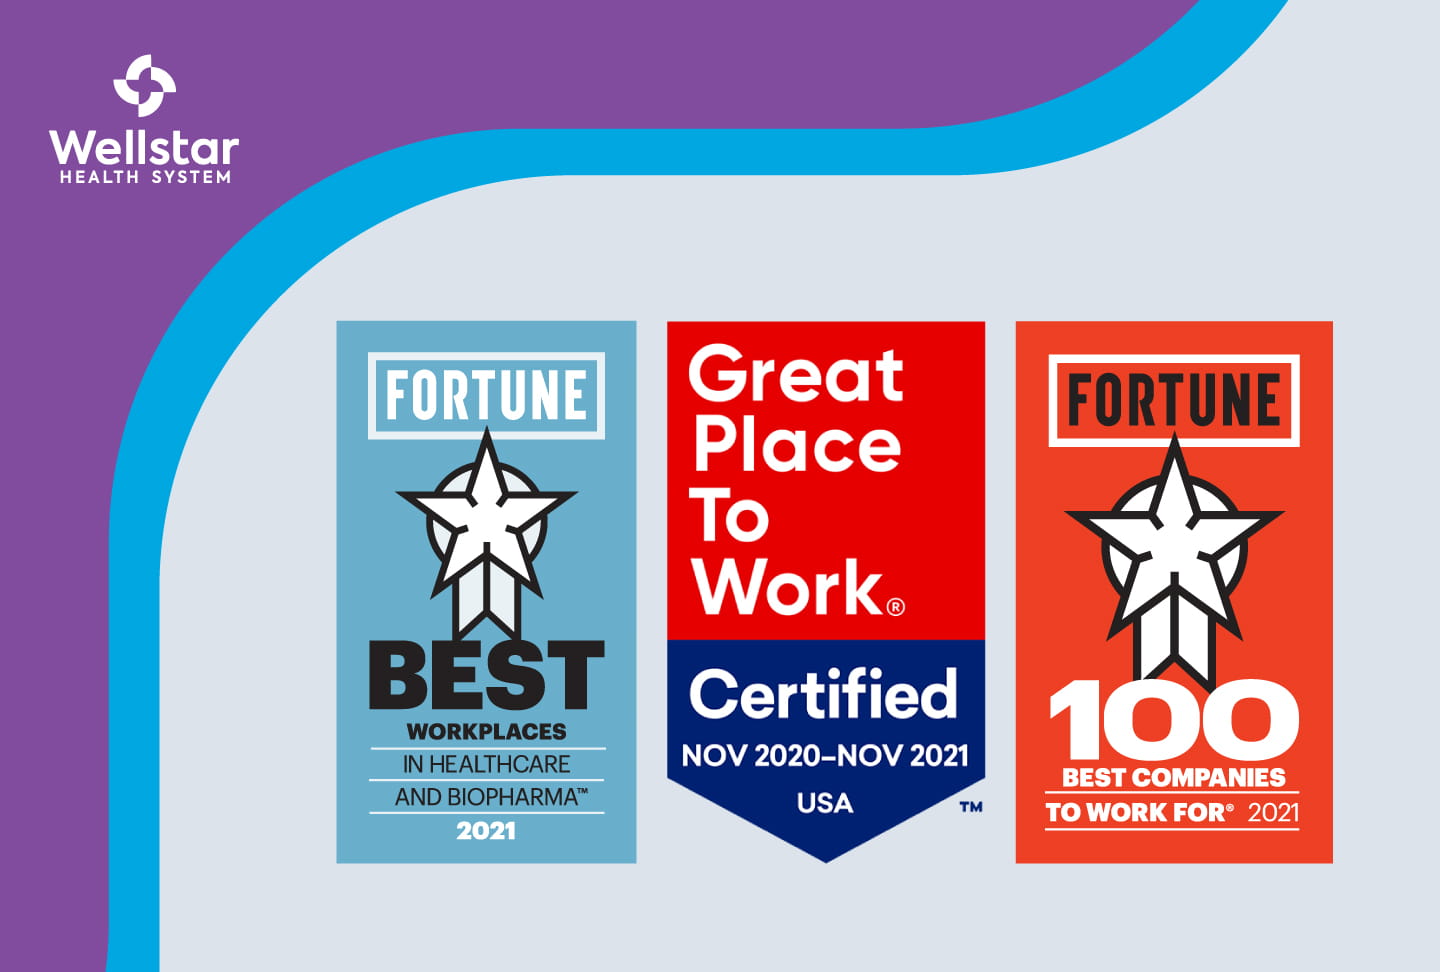 Logos for Fortune 100 Best Places to Work, Best Workplaces in Healthcare & Biopharma and GPTW Certified.